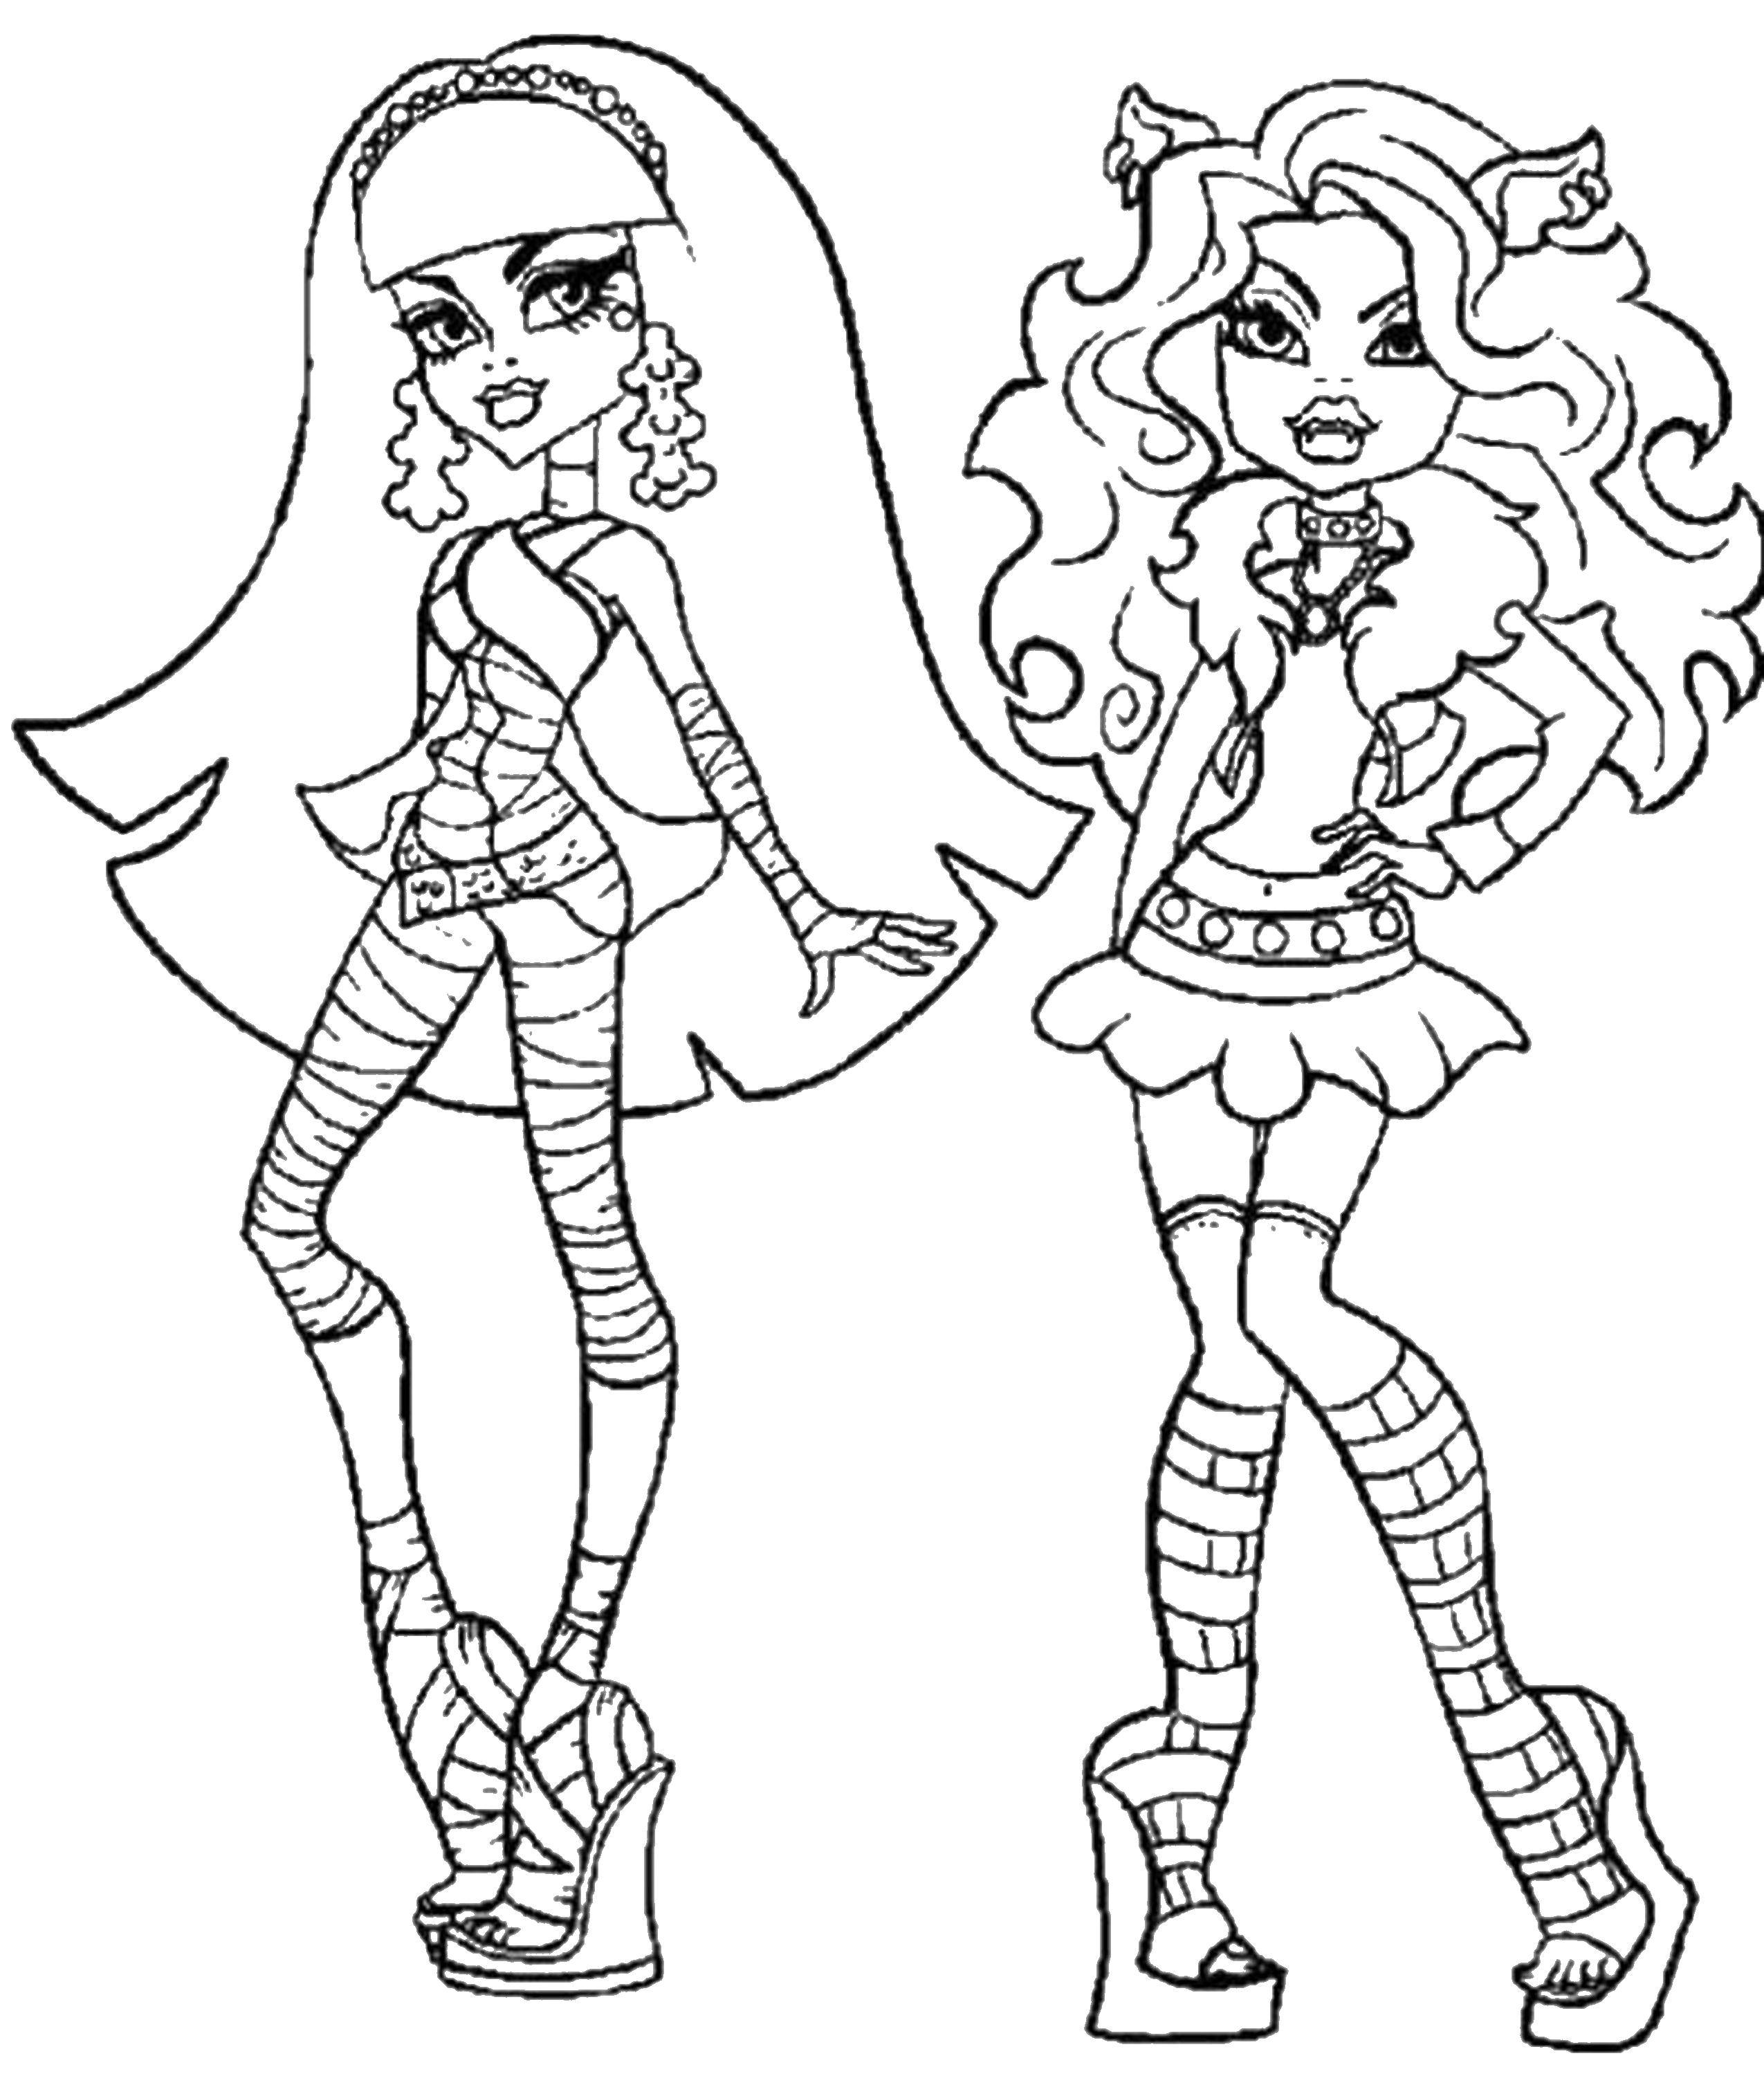 Coloring Monster high. Category Monster High. Tags:  Monstery.